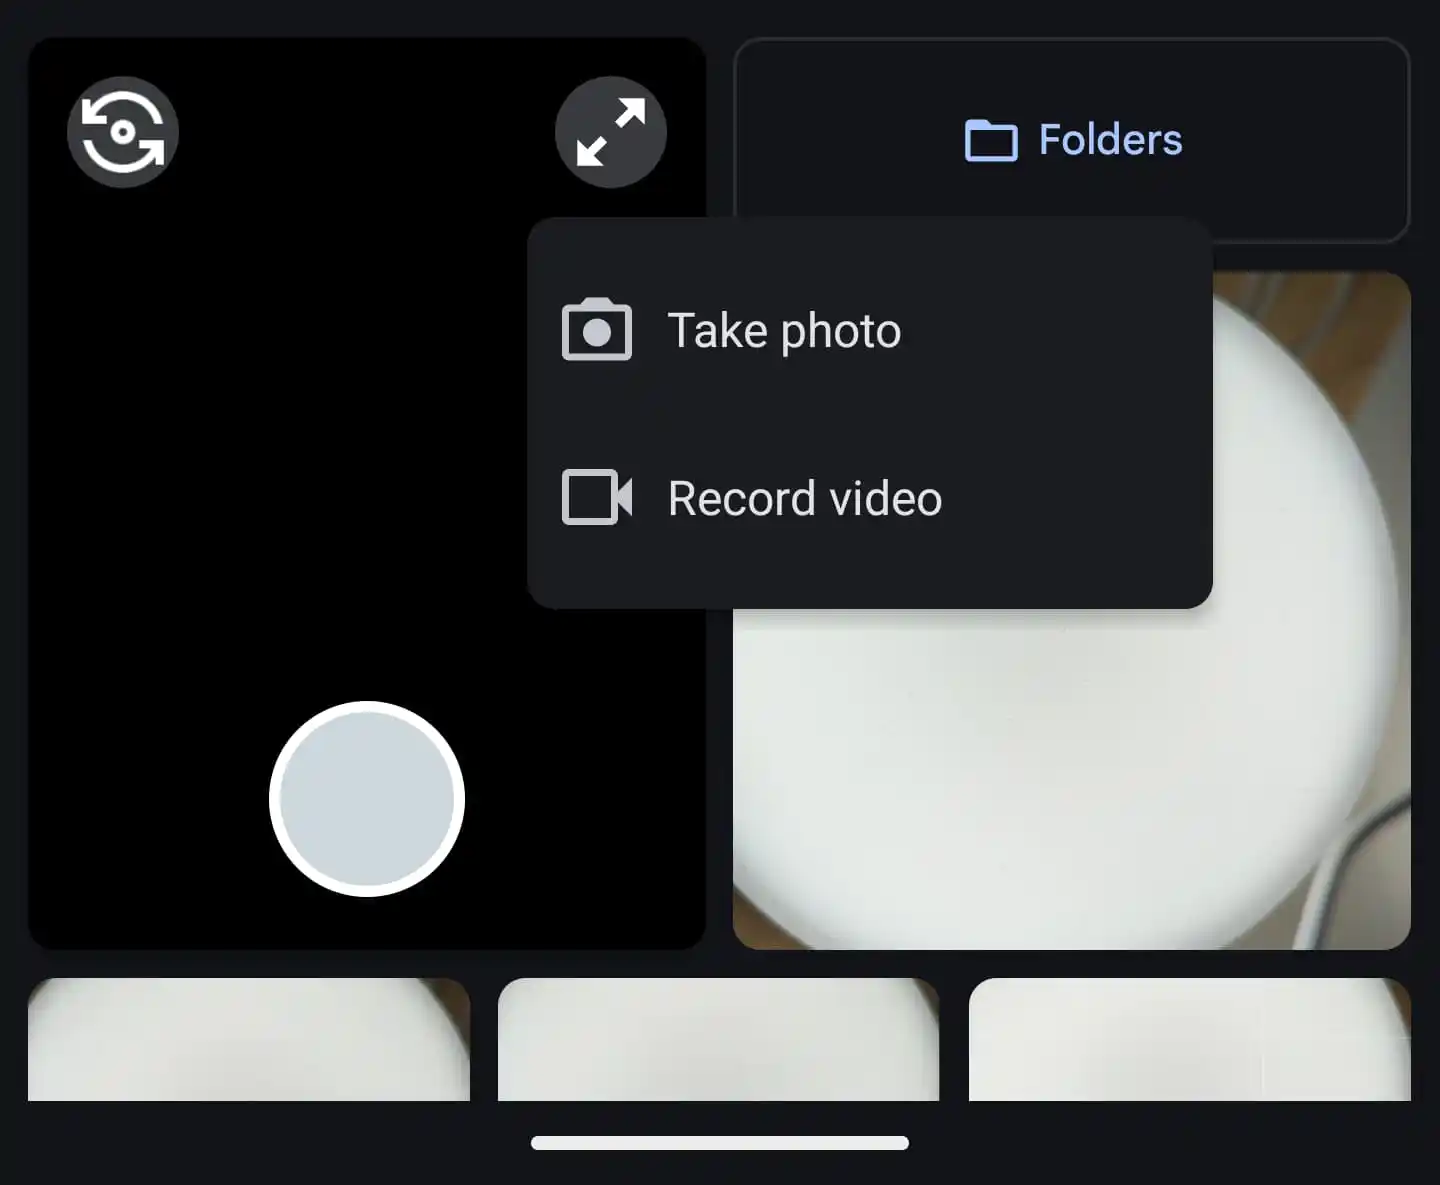 ❤ Google Messages rolling out new custom camera